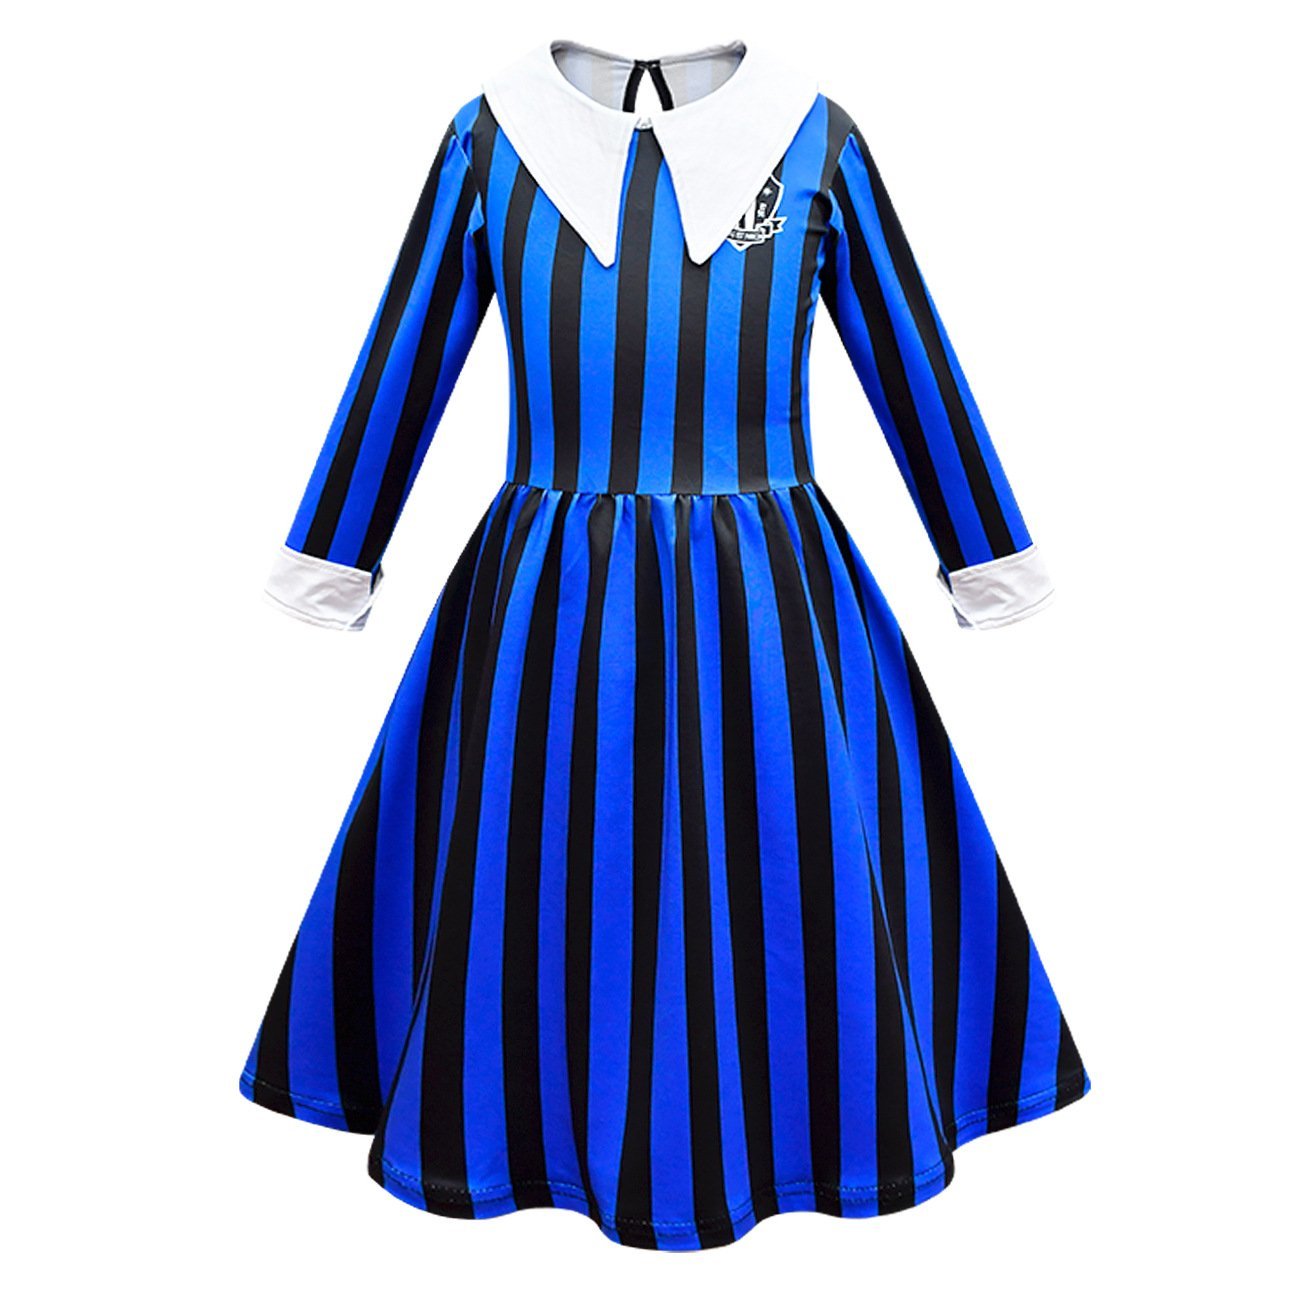 Wednesday Costume The Addams Family Cosplay Striped Dress For Kids